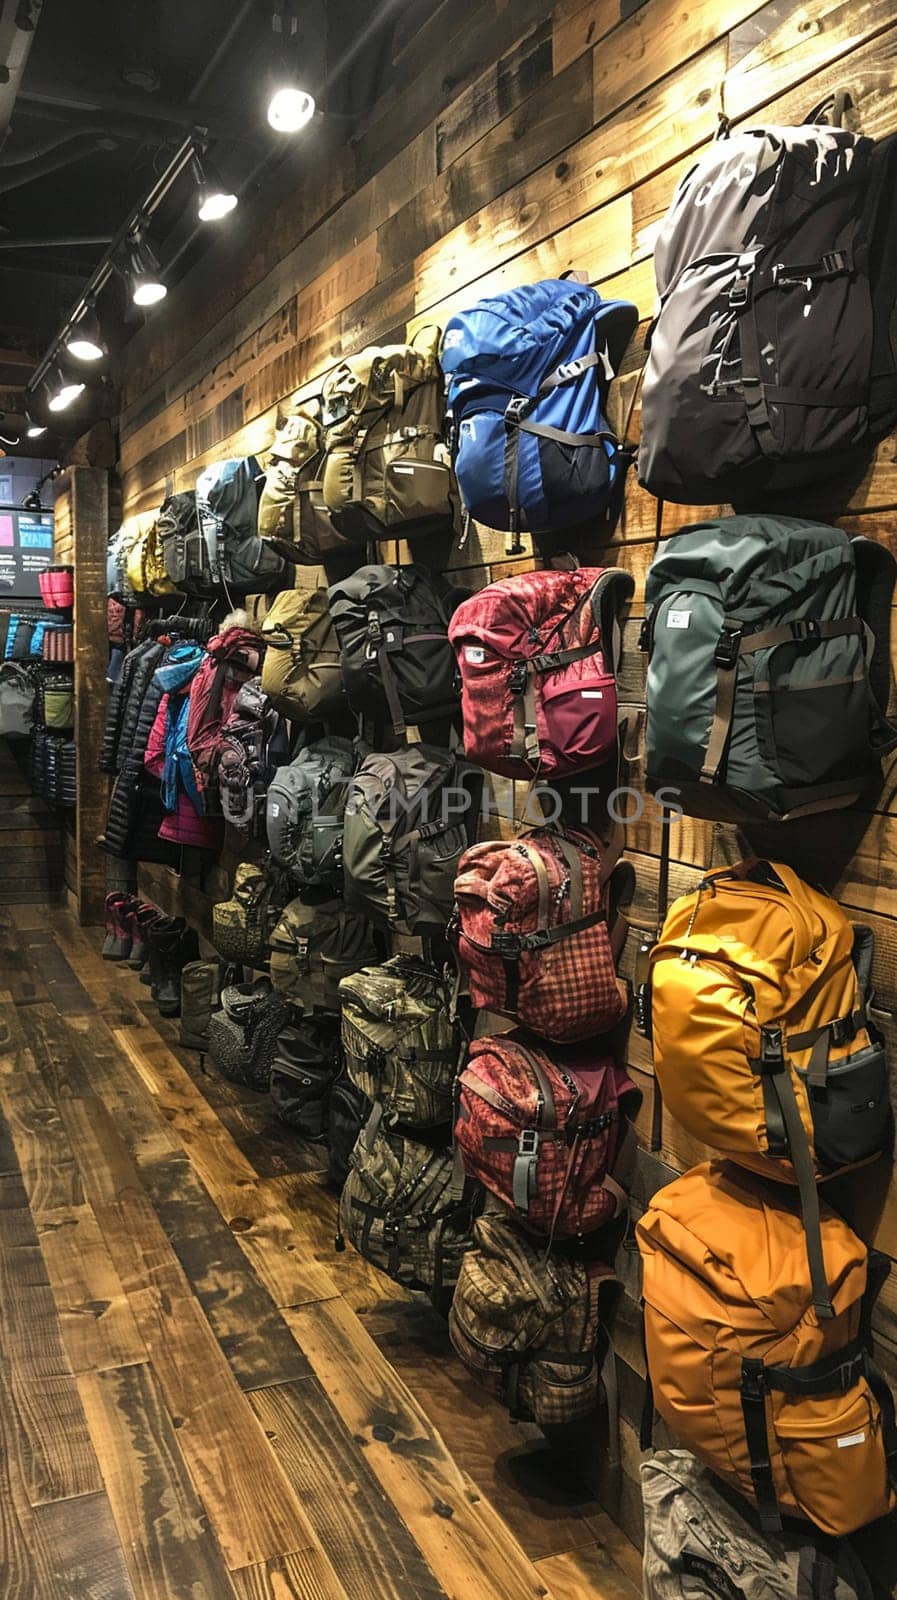 Outdoor Gear Store Equips Adventurous Spirits in Business of Exploration Retail by Benzoix